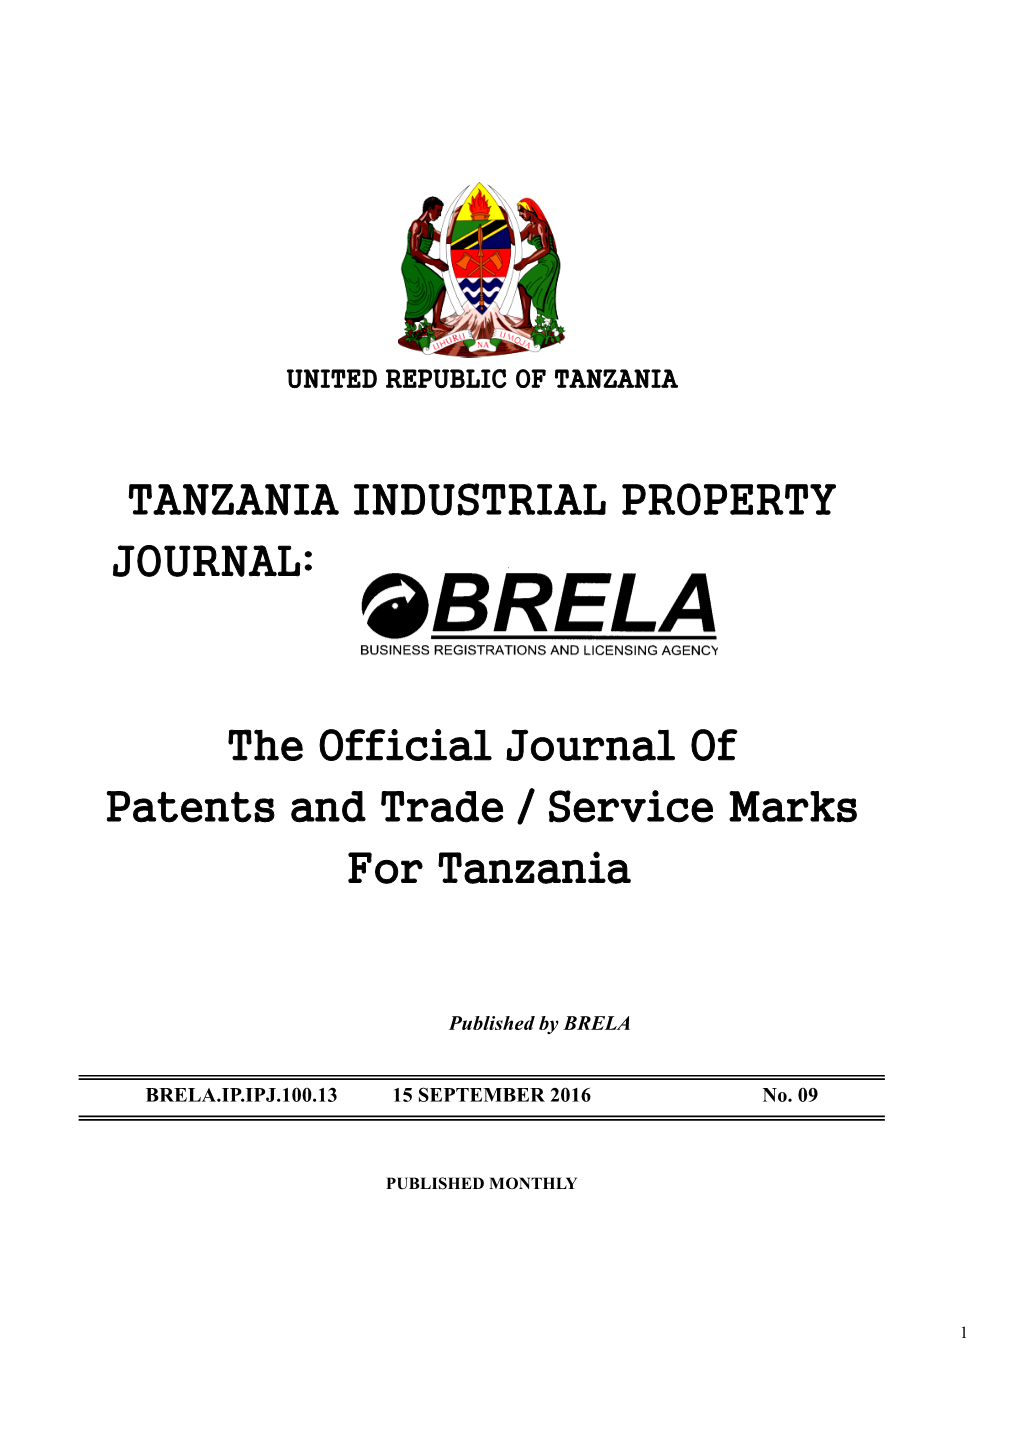 The Official Journal of Patents and Trade / Service Marks